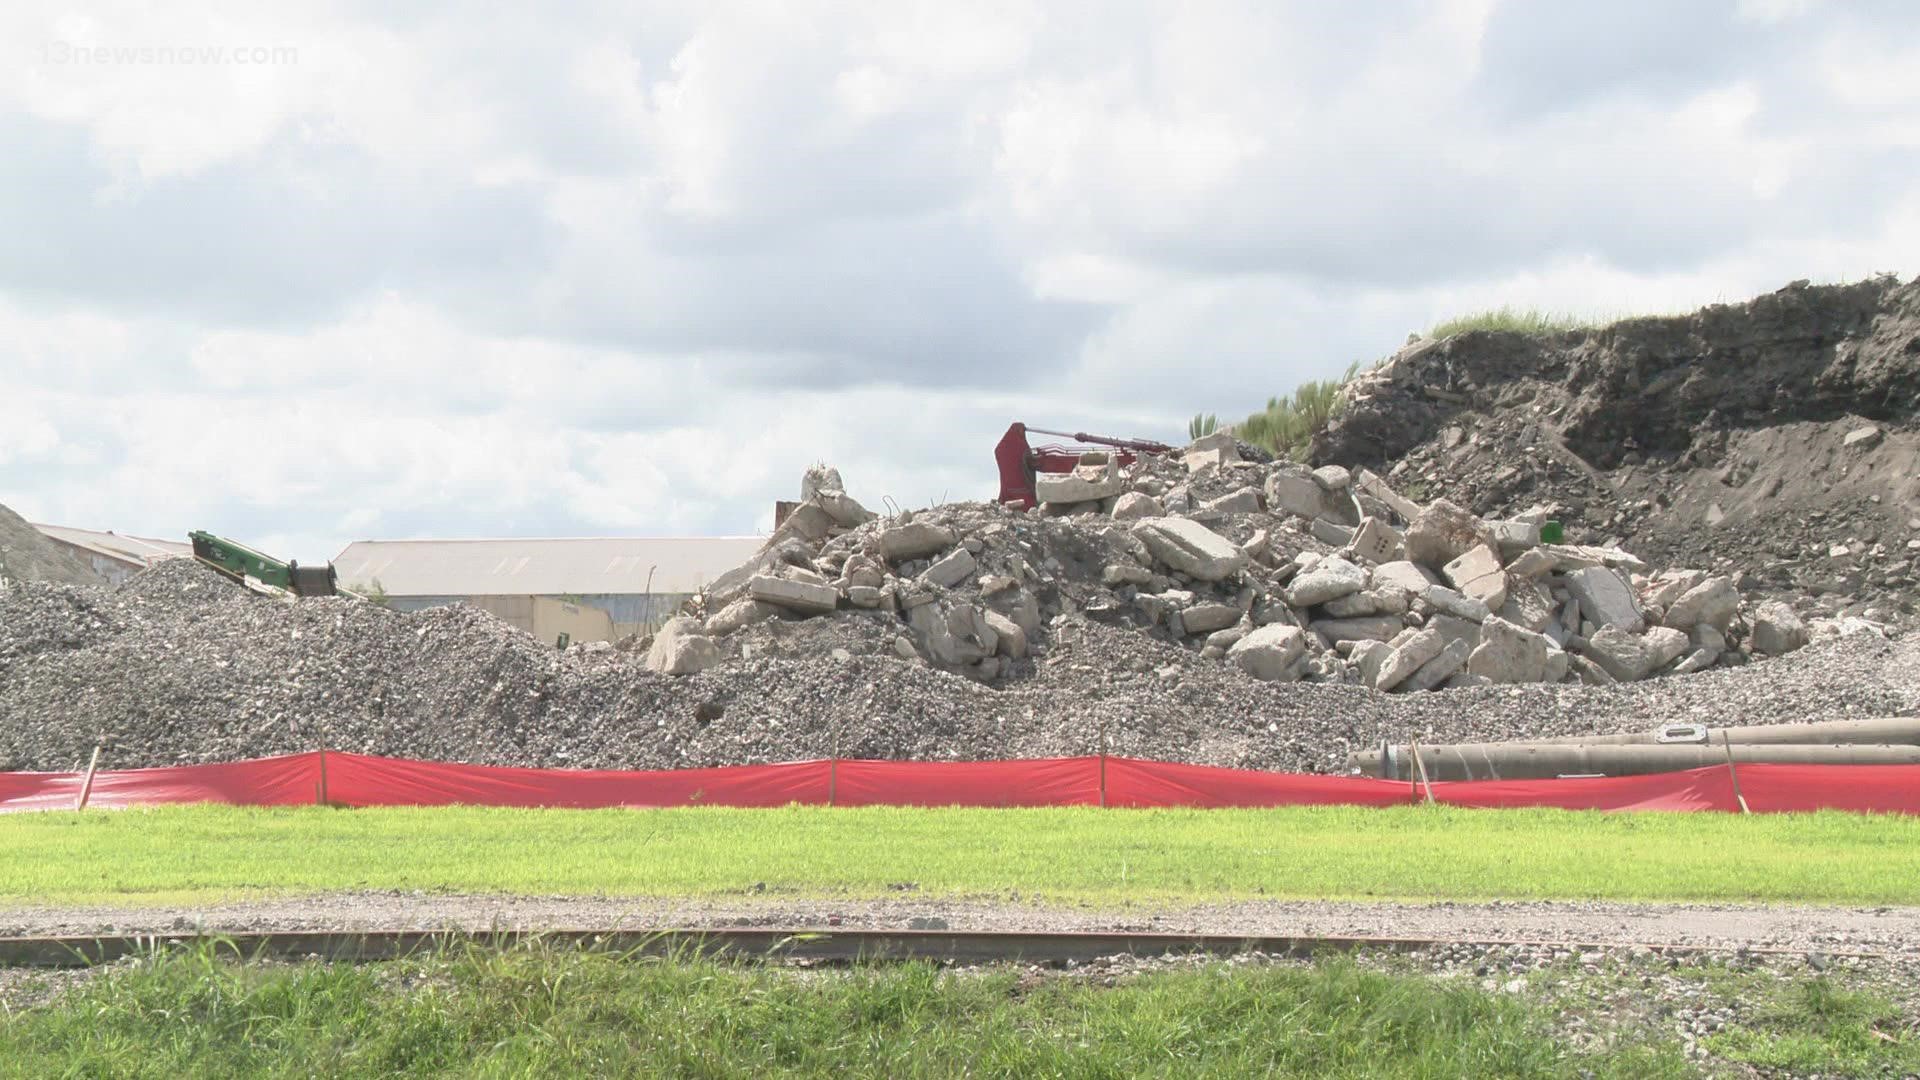 The Breeden Company's executive vice president said they will transform this pile of rubble into a 438-unit mixed-use apartment complex.